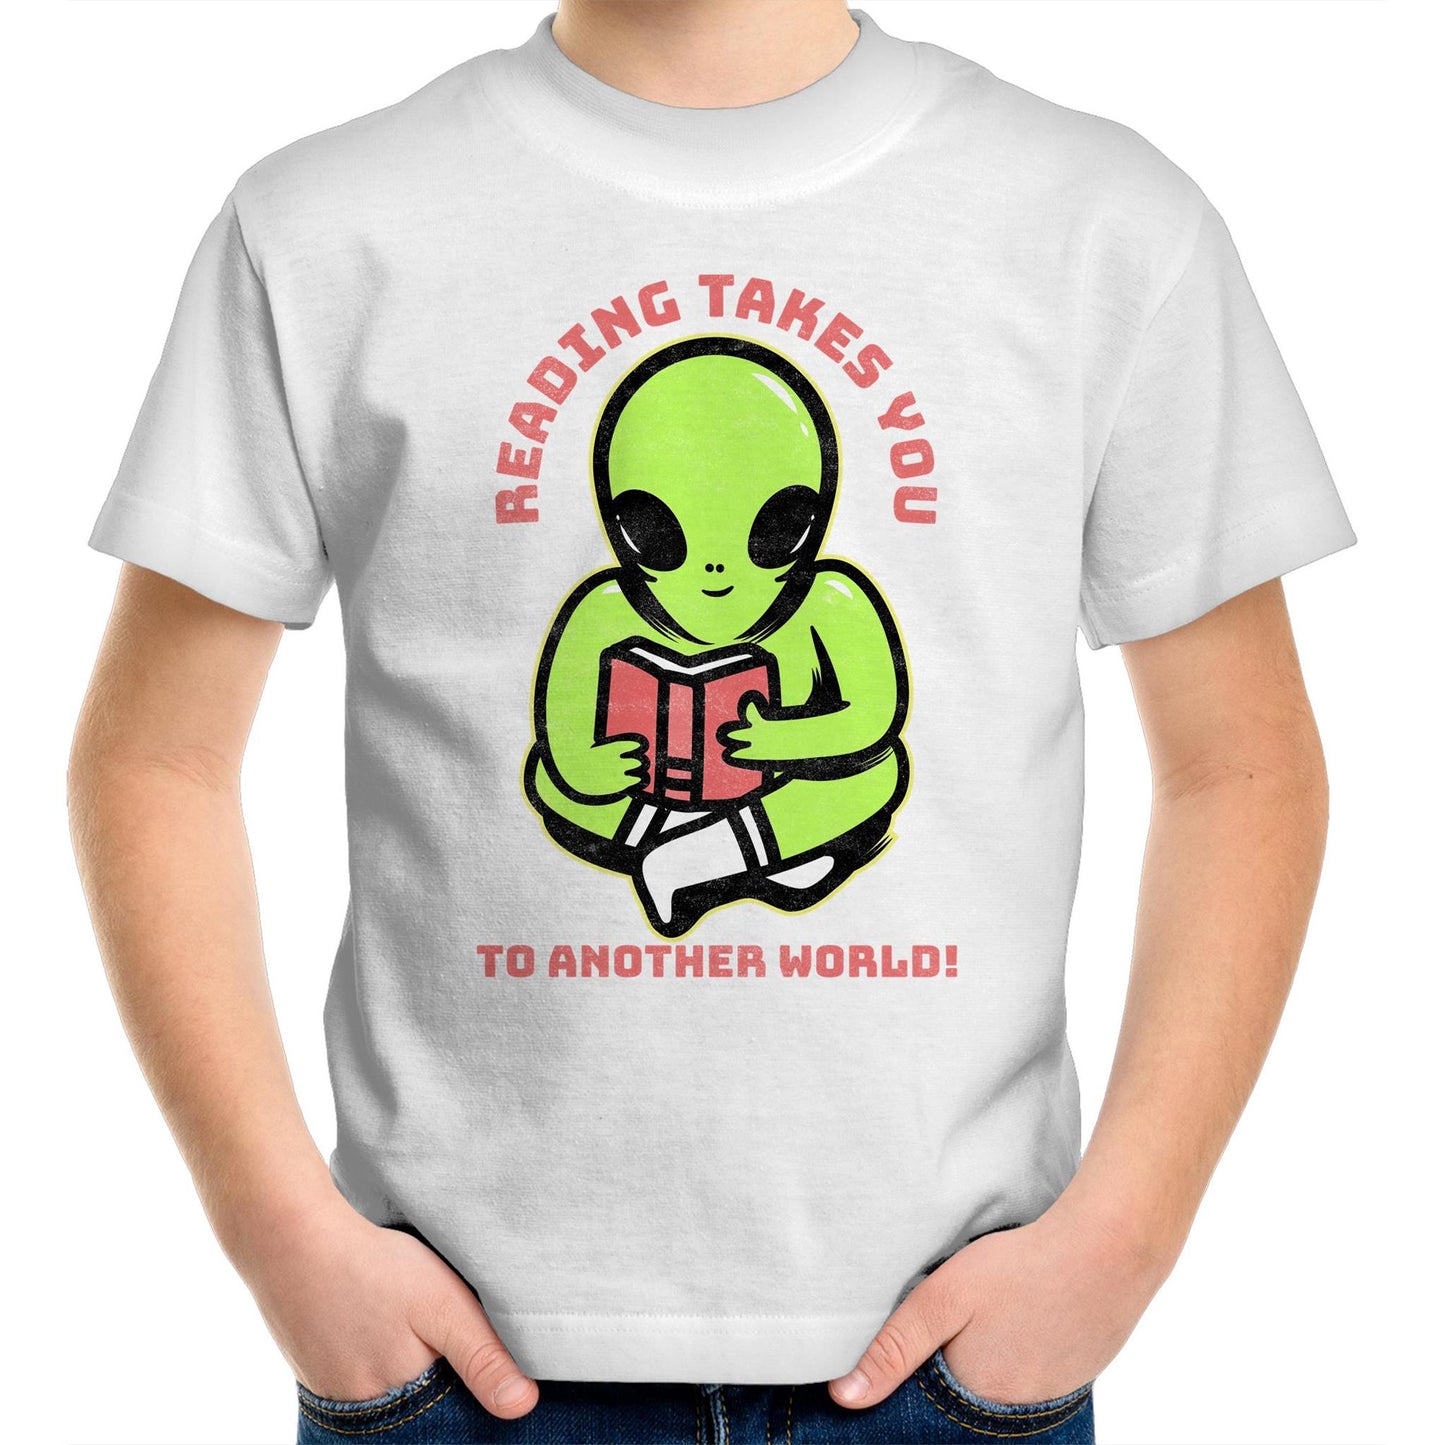 Reading Takes You To Another World, Alien - Kids Youth T-Shirt White Kids Youth T-shirt Reading Sci Fi